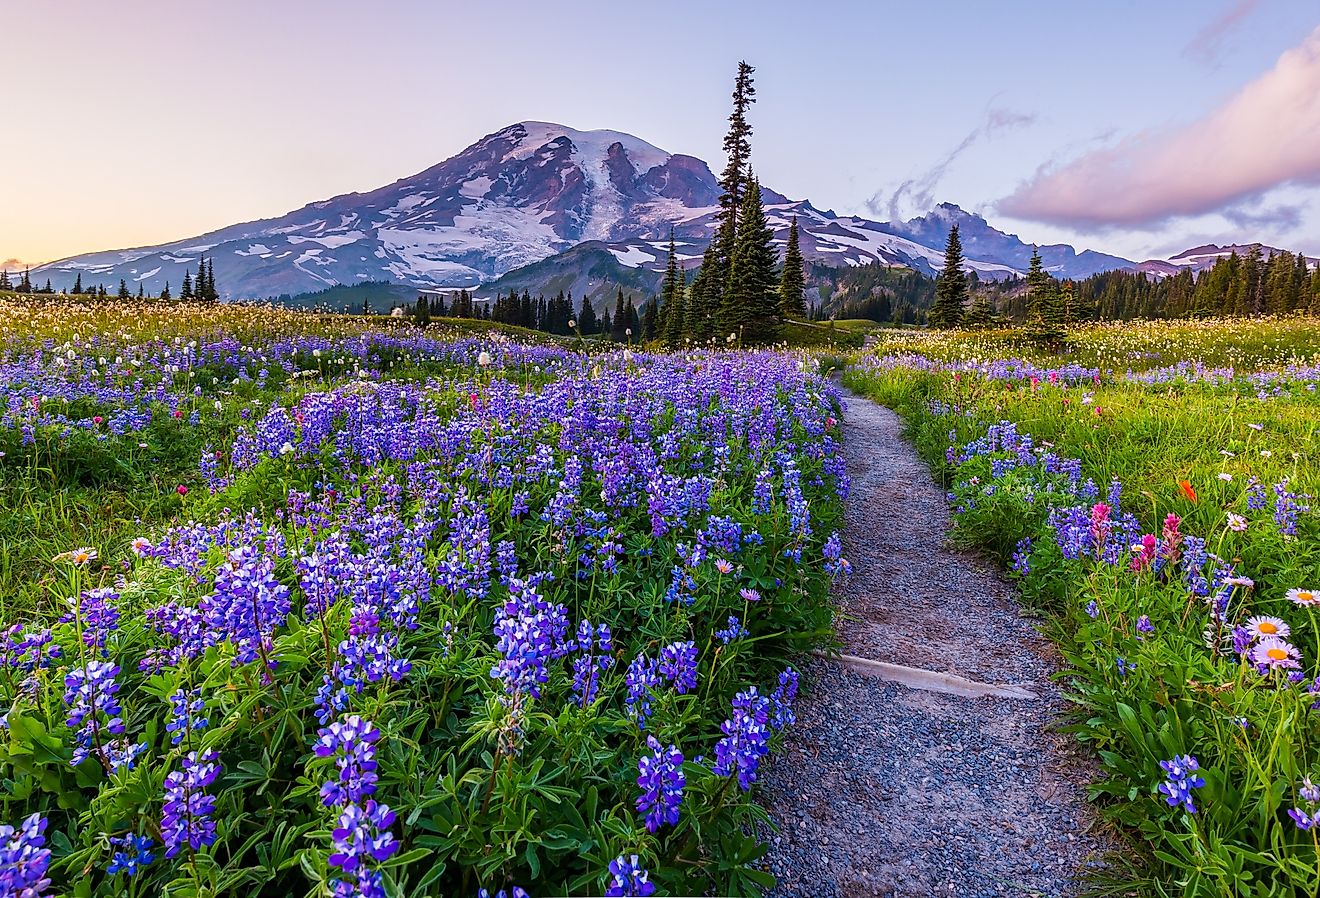 Reflection lake trail in summer with purple flowers blooming, Mount Rainier, Washington.